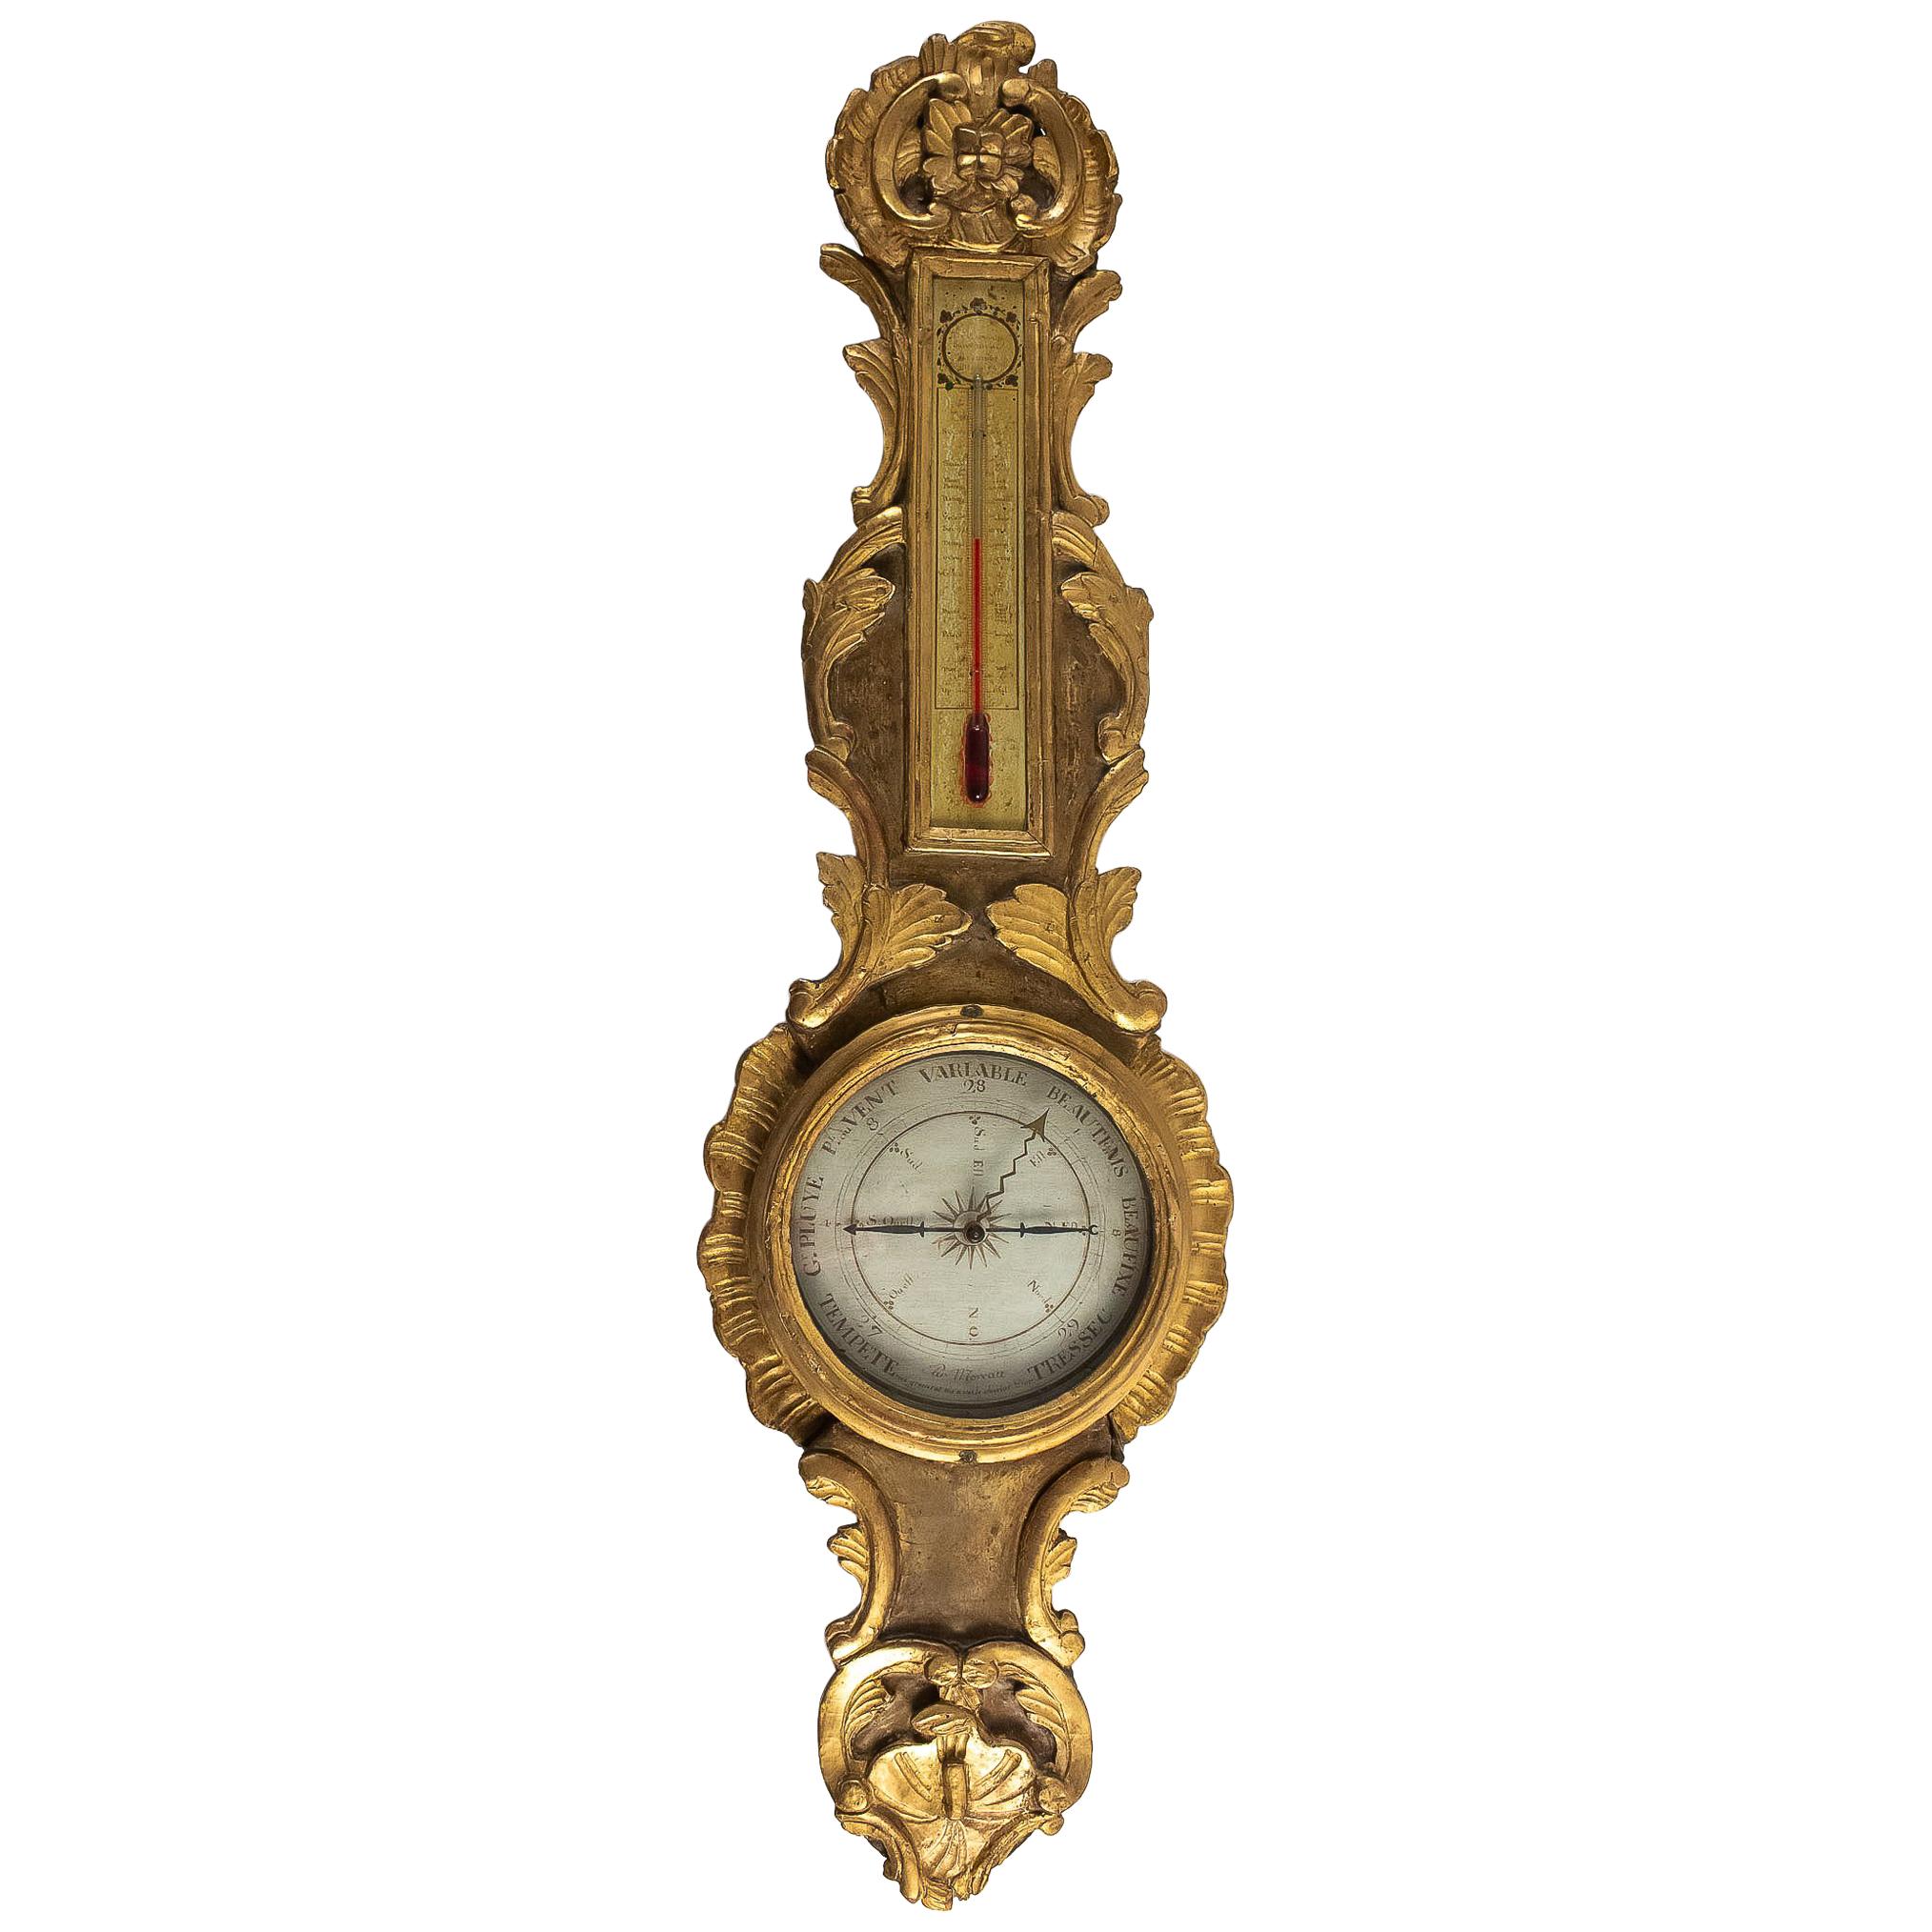 By Moreau, French Louis XV Period Decorative Barometer-Thermometer, circa 1770